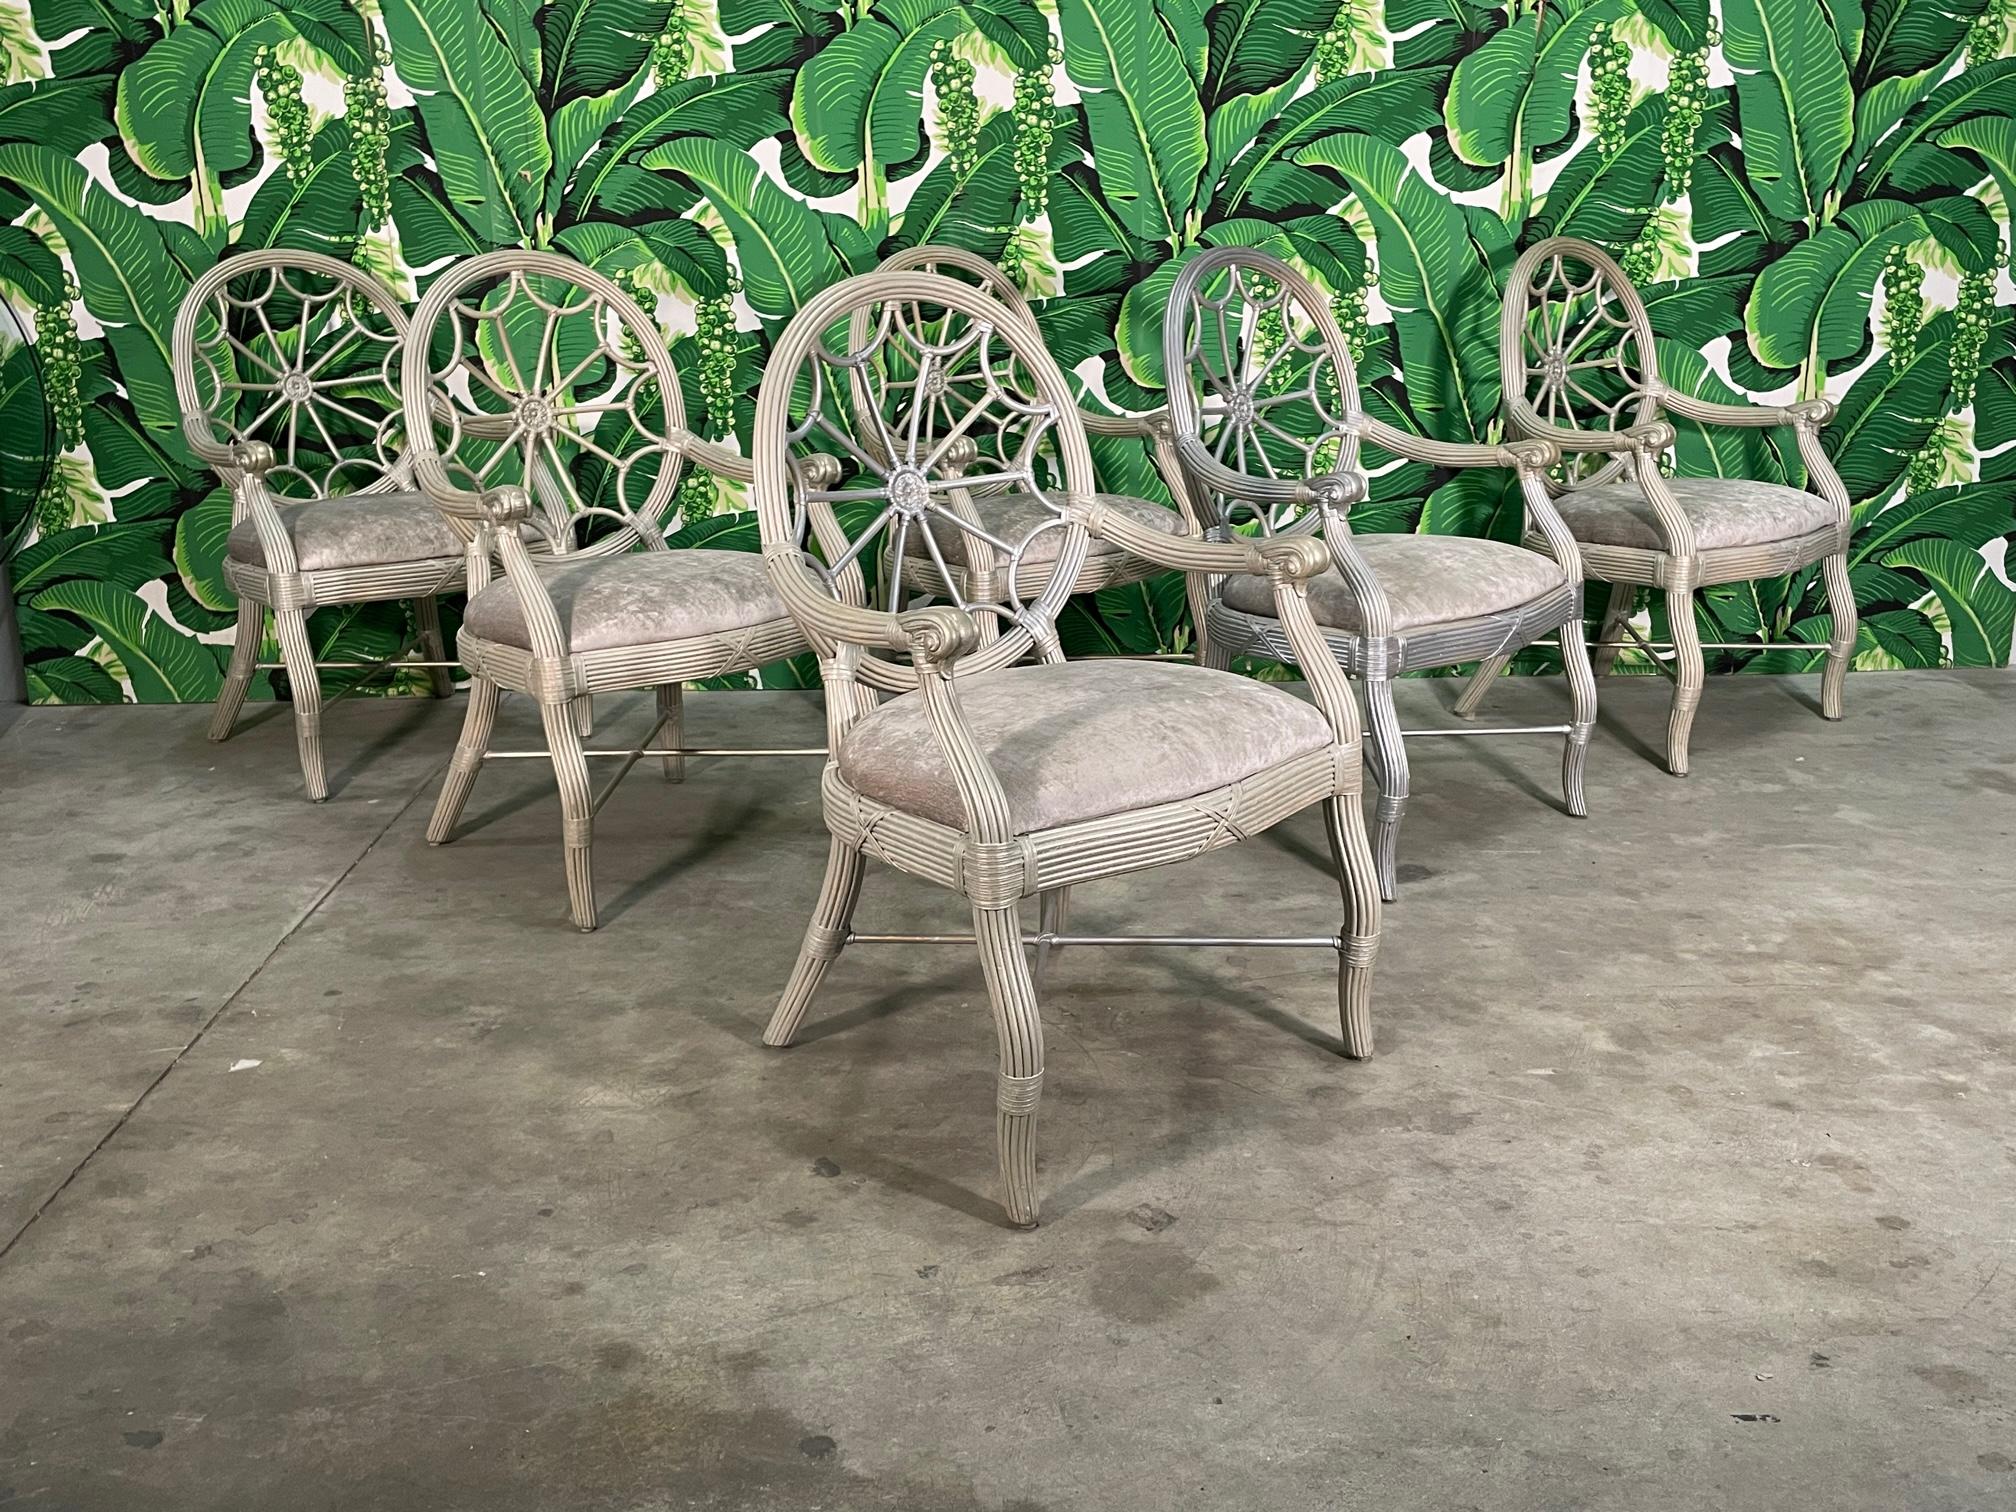 Set of six McGuire style rattan spider back dining chairs features a pencil reed rattan with leather bindings. X stretchers along with splayed rear legs. Upholstered in a matching soft, silver fabric. Good condition with imperfections consistent